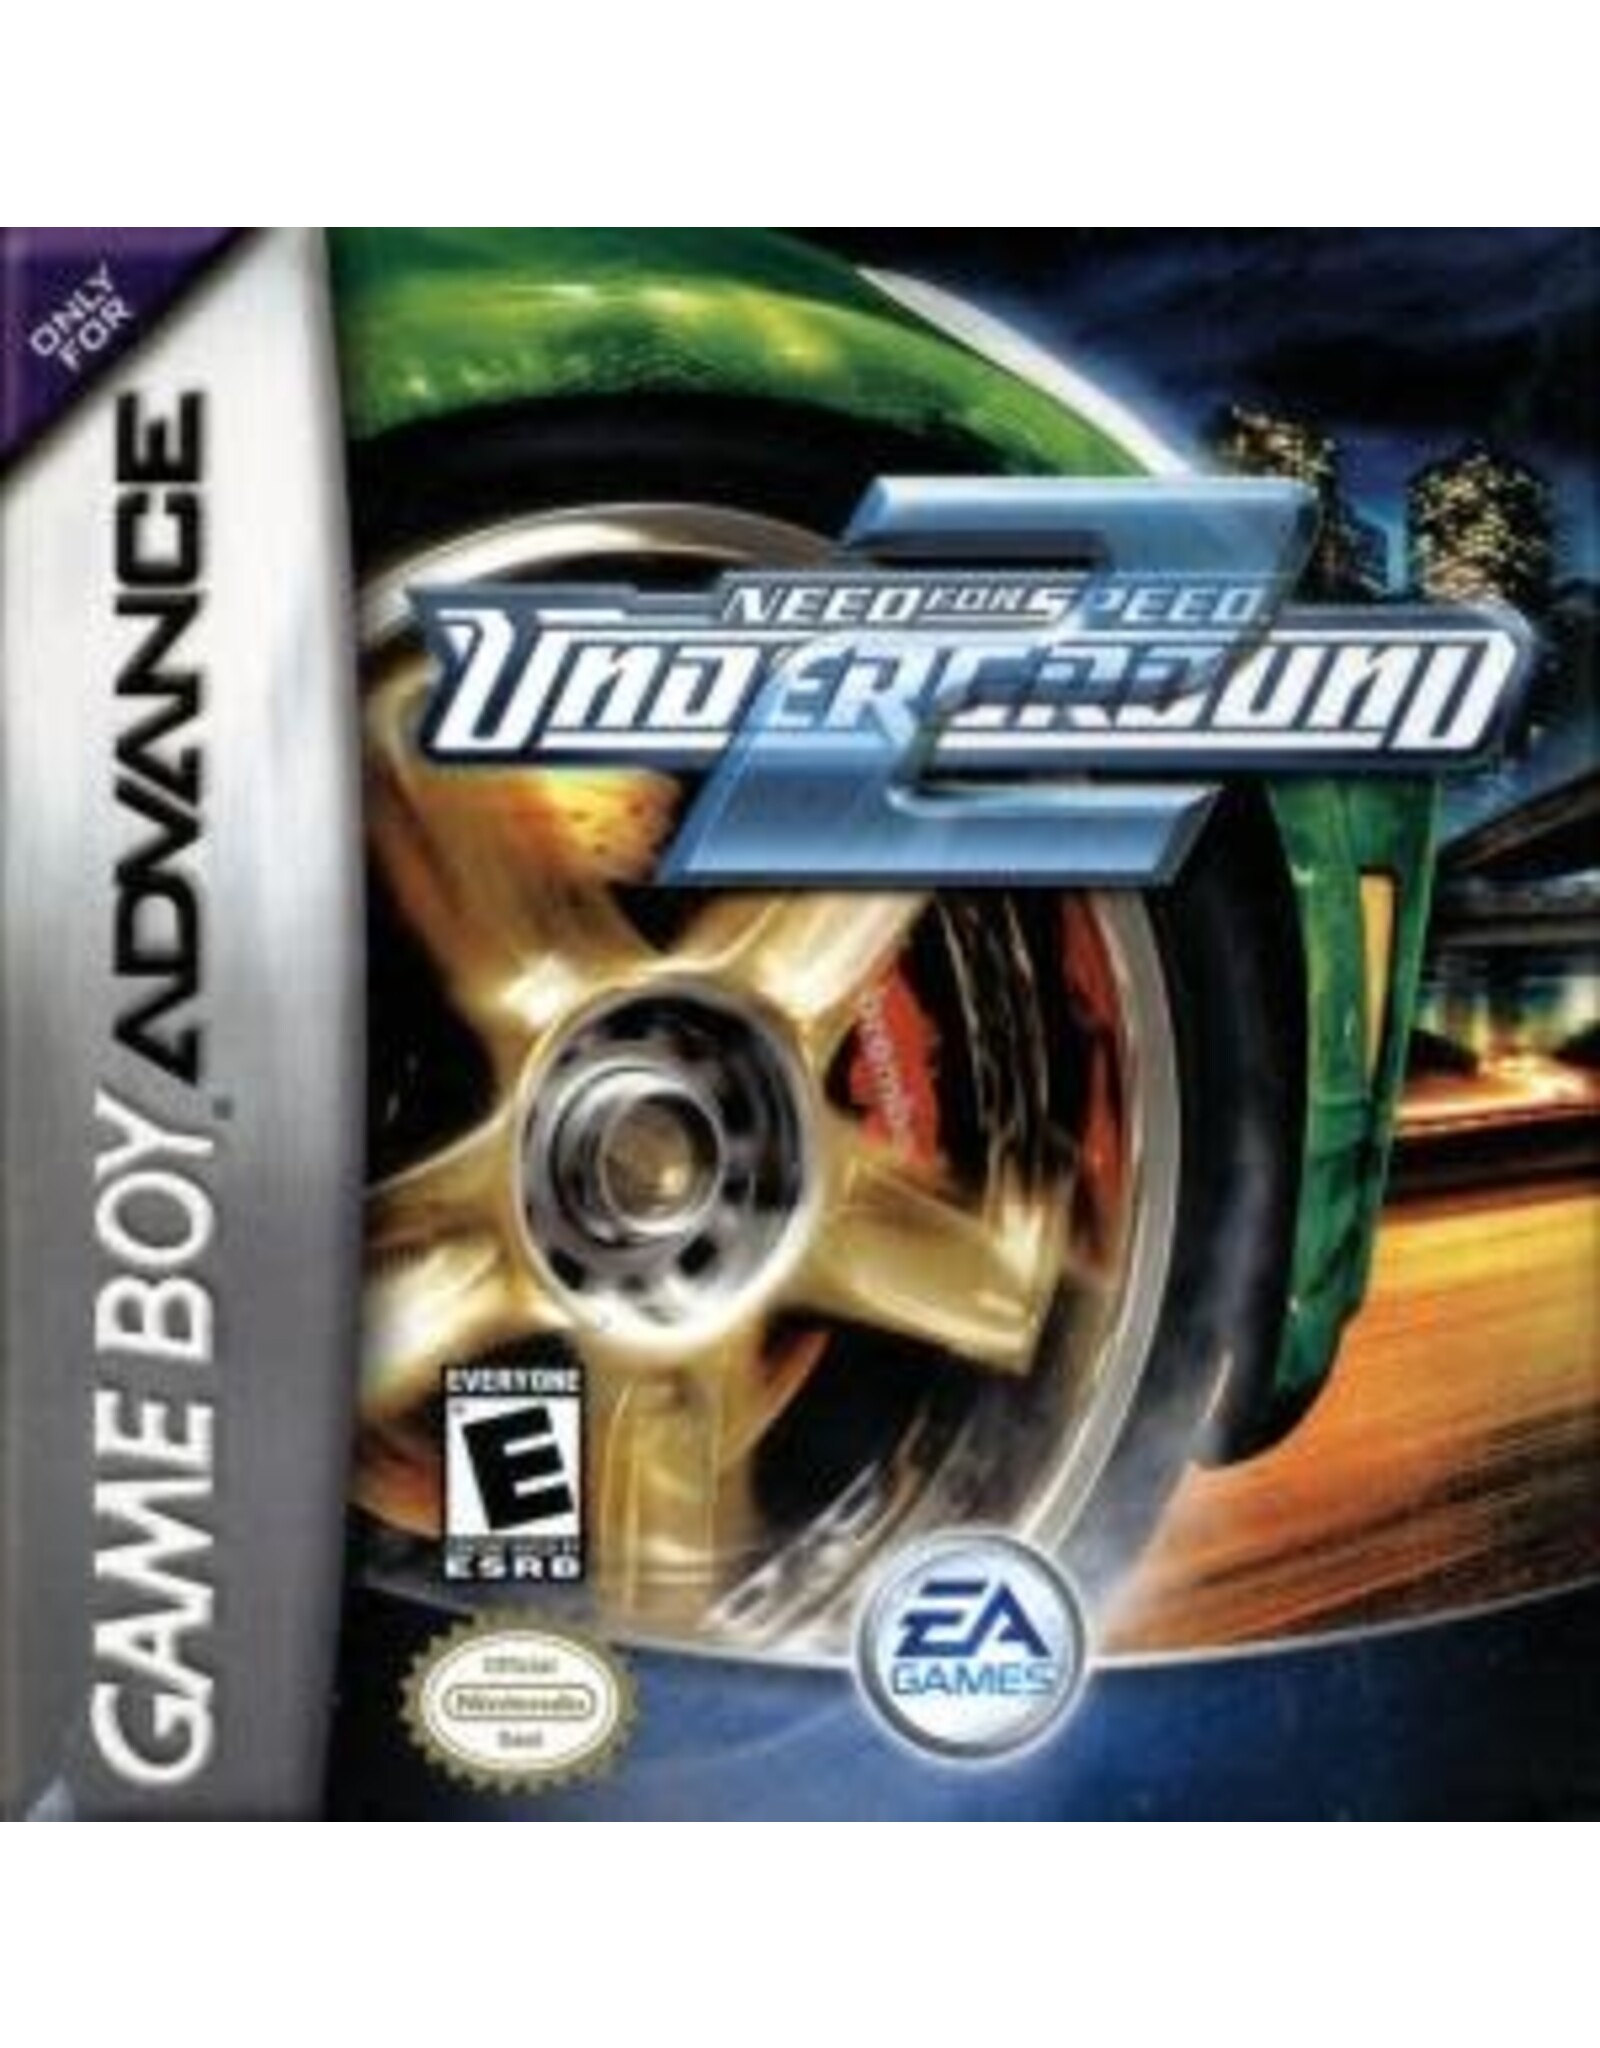 Game Boy Advance Need for Speed Underground 2 (Used, Cart Only)